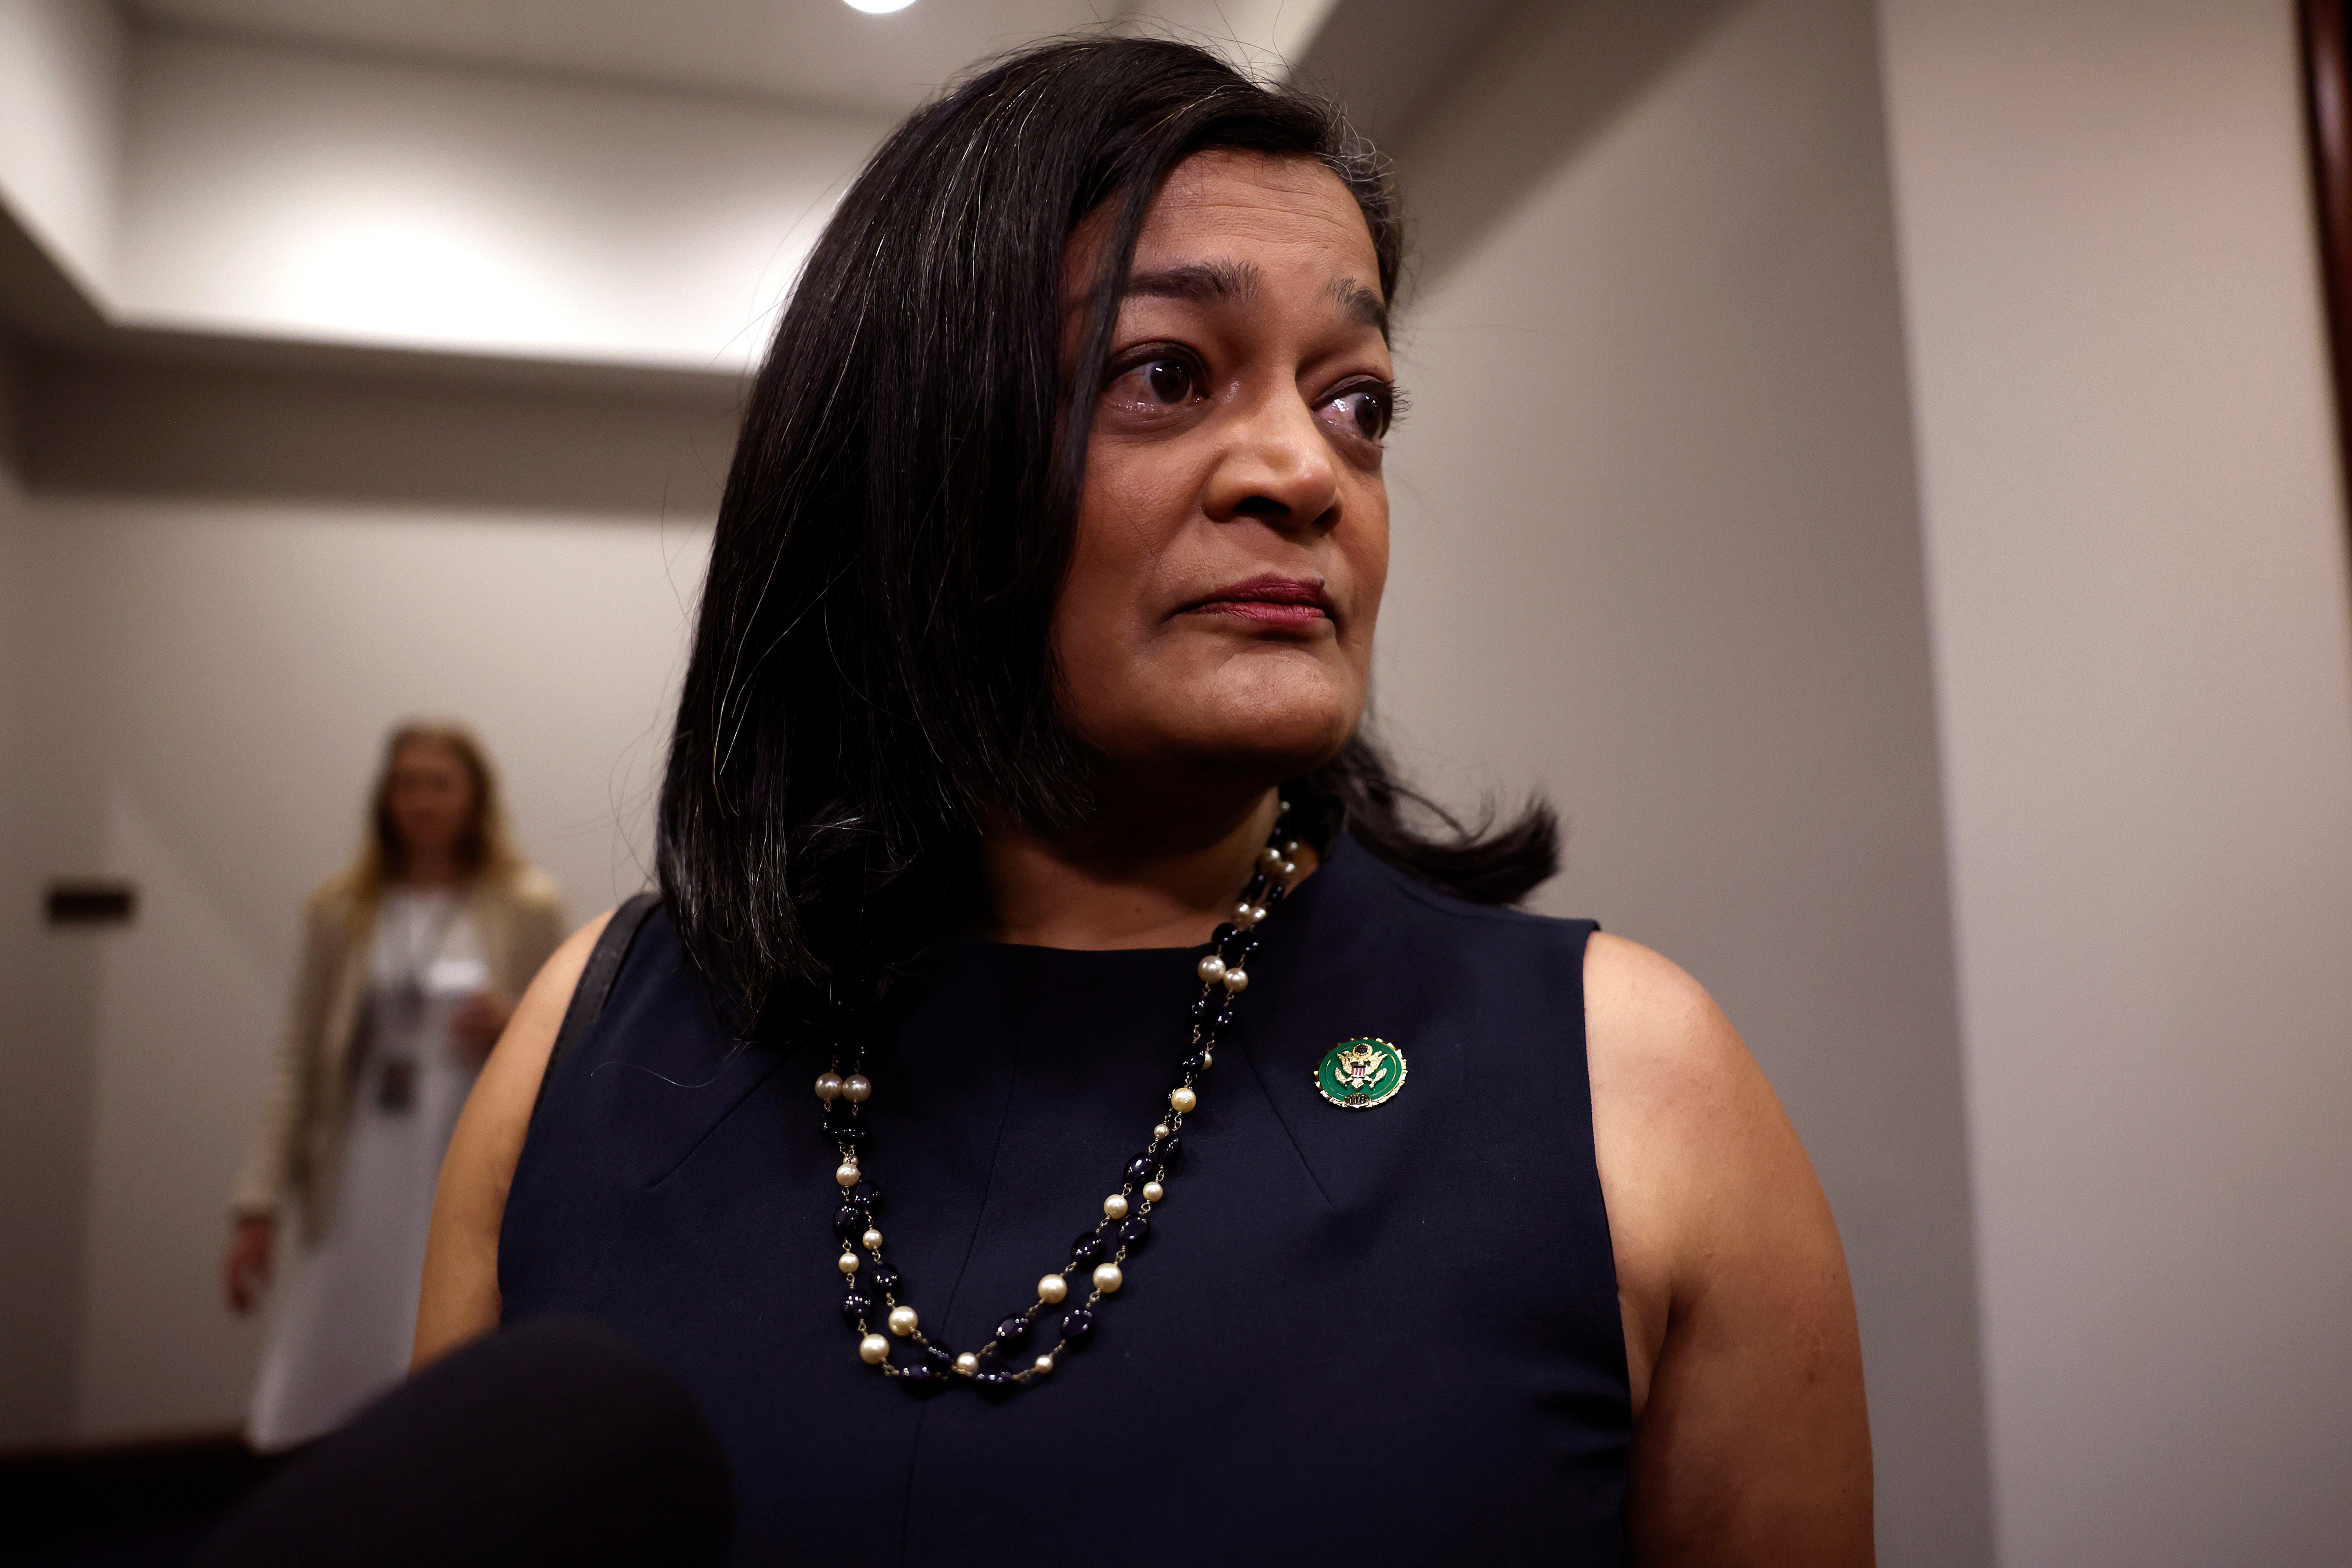 Democratic US Rep Pramilia Jayapal of Washington has supported passage of the Equality Act and Trans Bill of Rights in Congress.